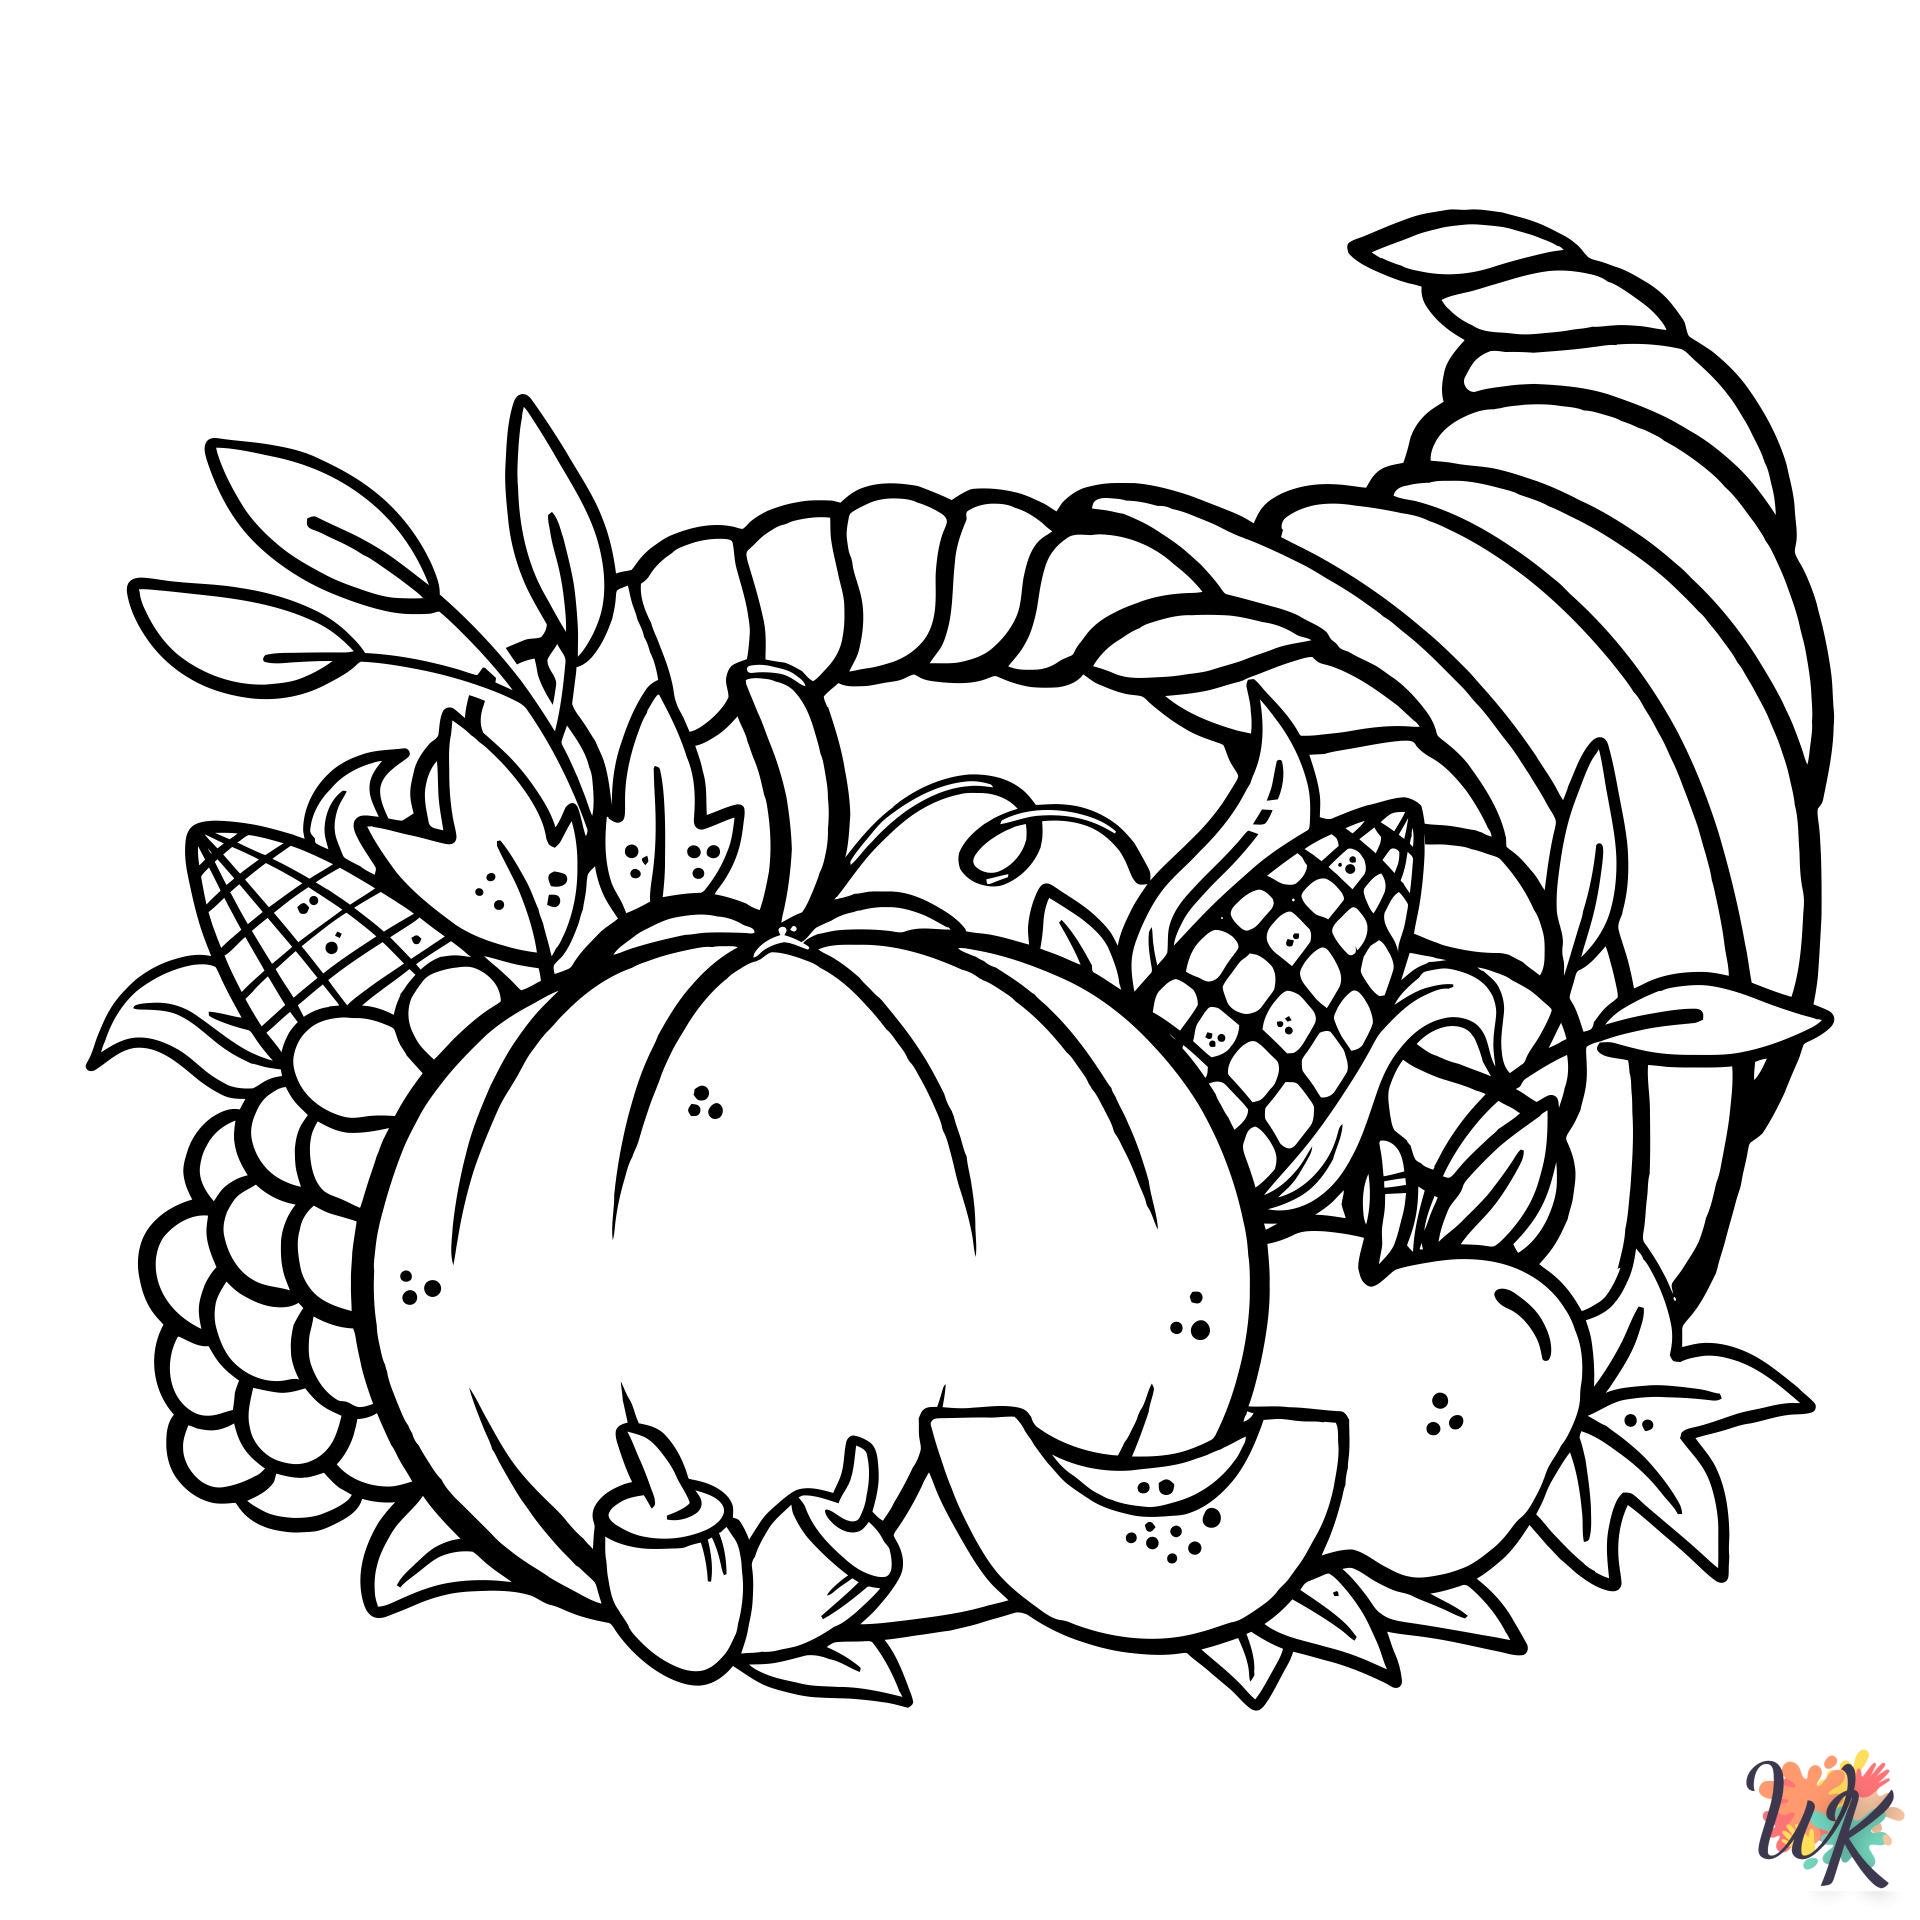 Cornucopia themed coloring pages